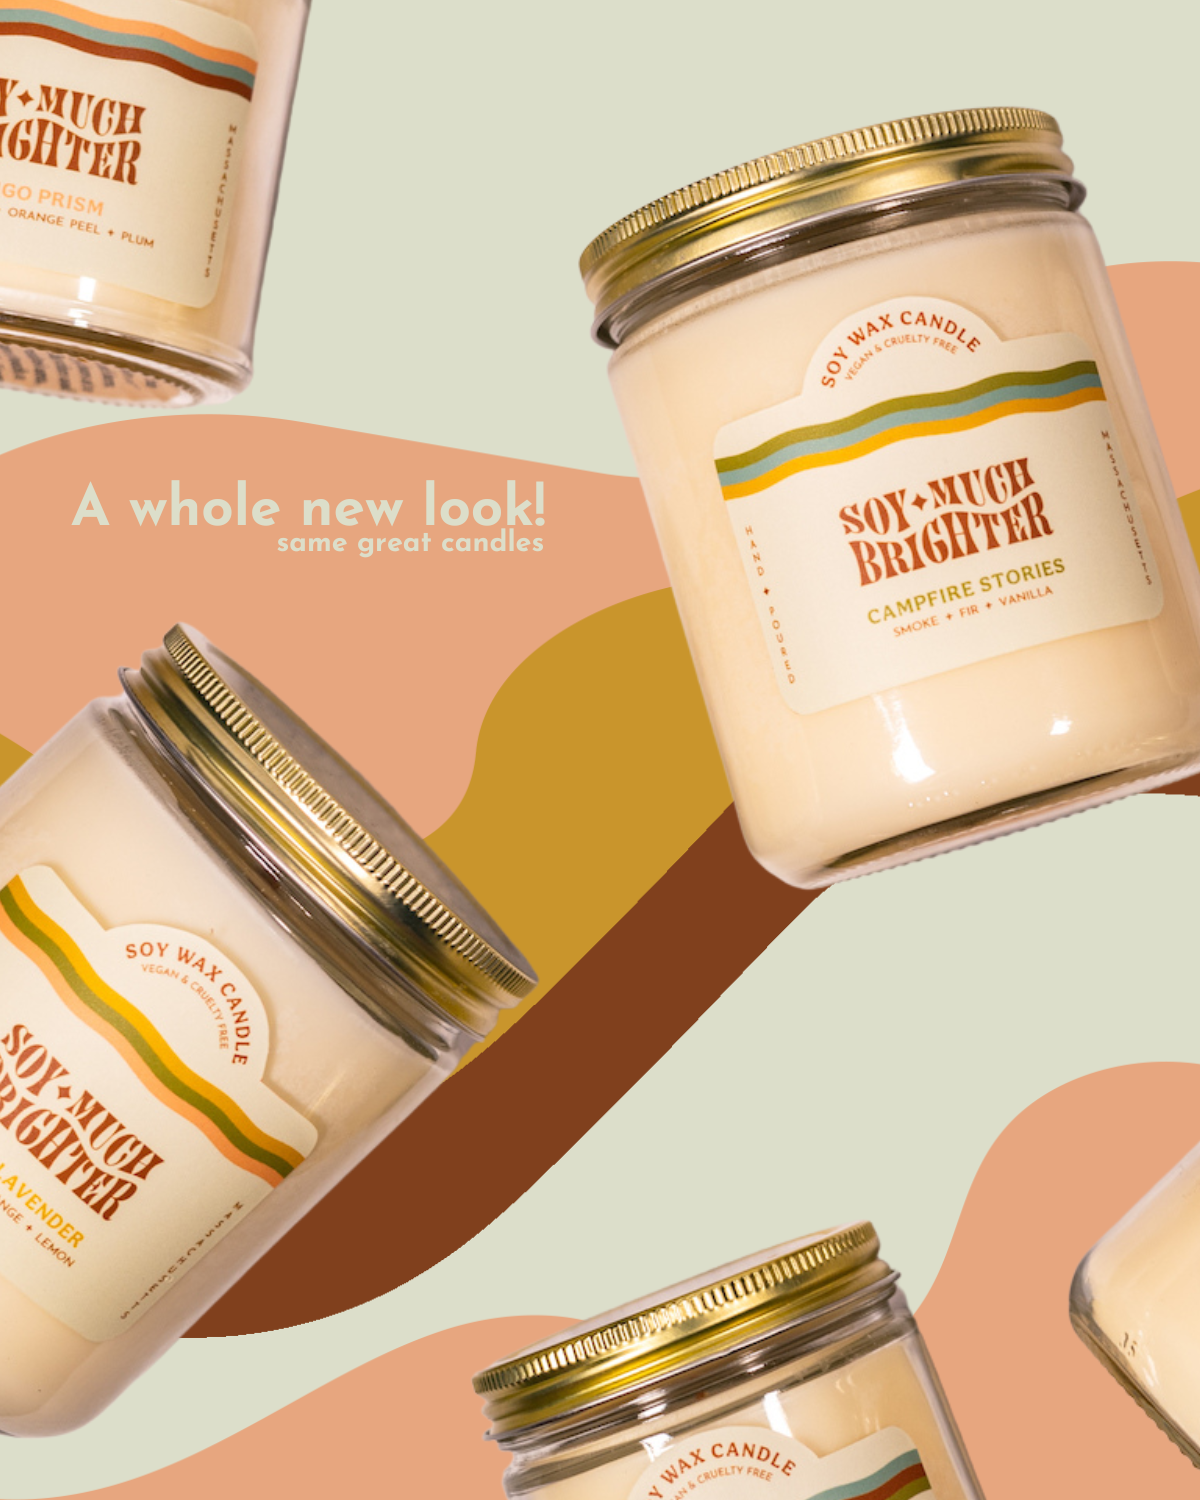 The best soy candles in Boston by Soy Much Brighter Candle Co